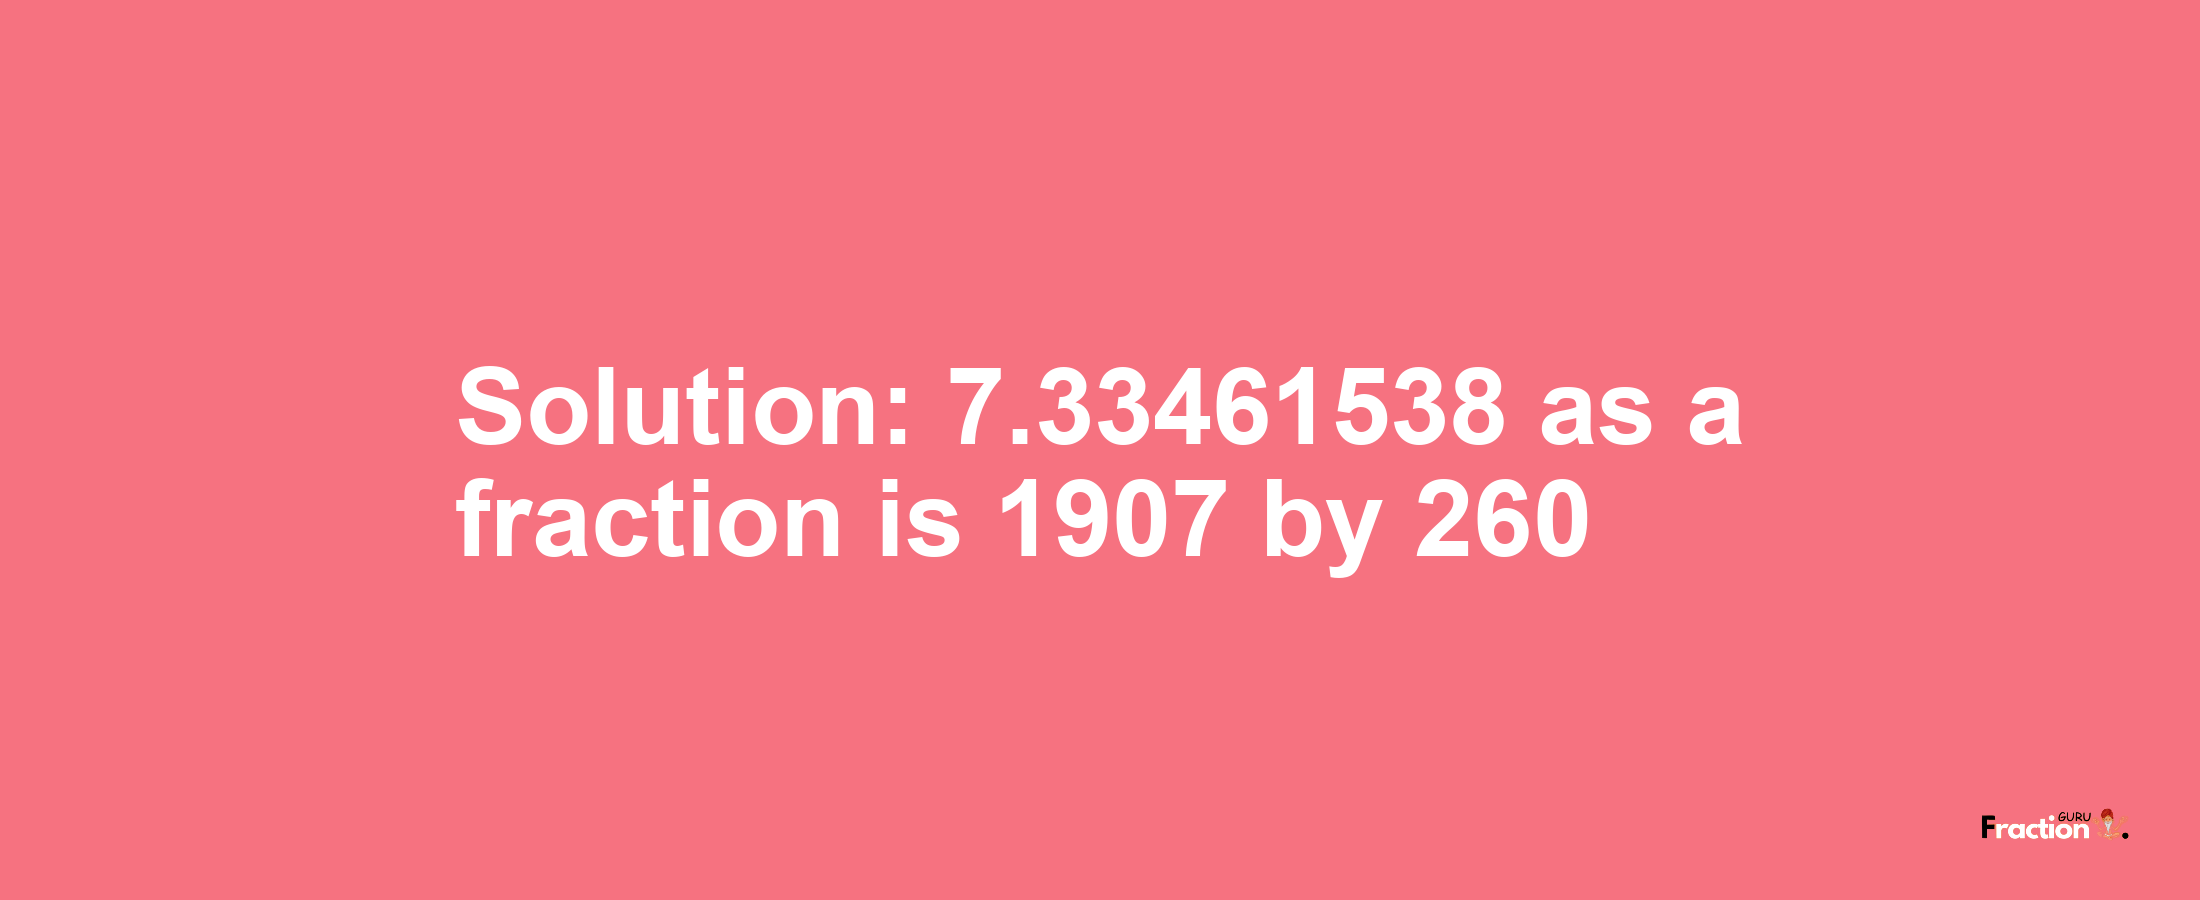 Solution:7.33461538 as a fraction is 1907/260